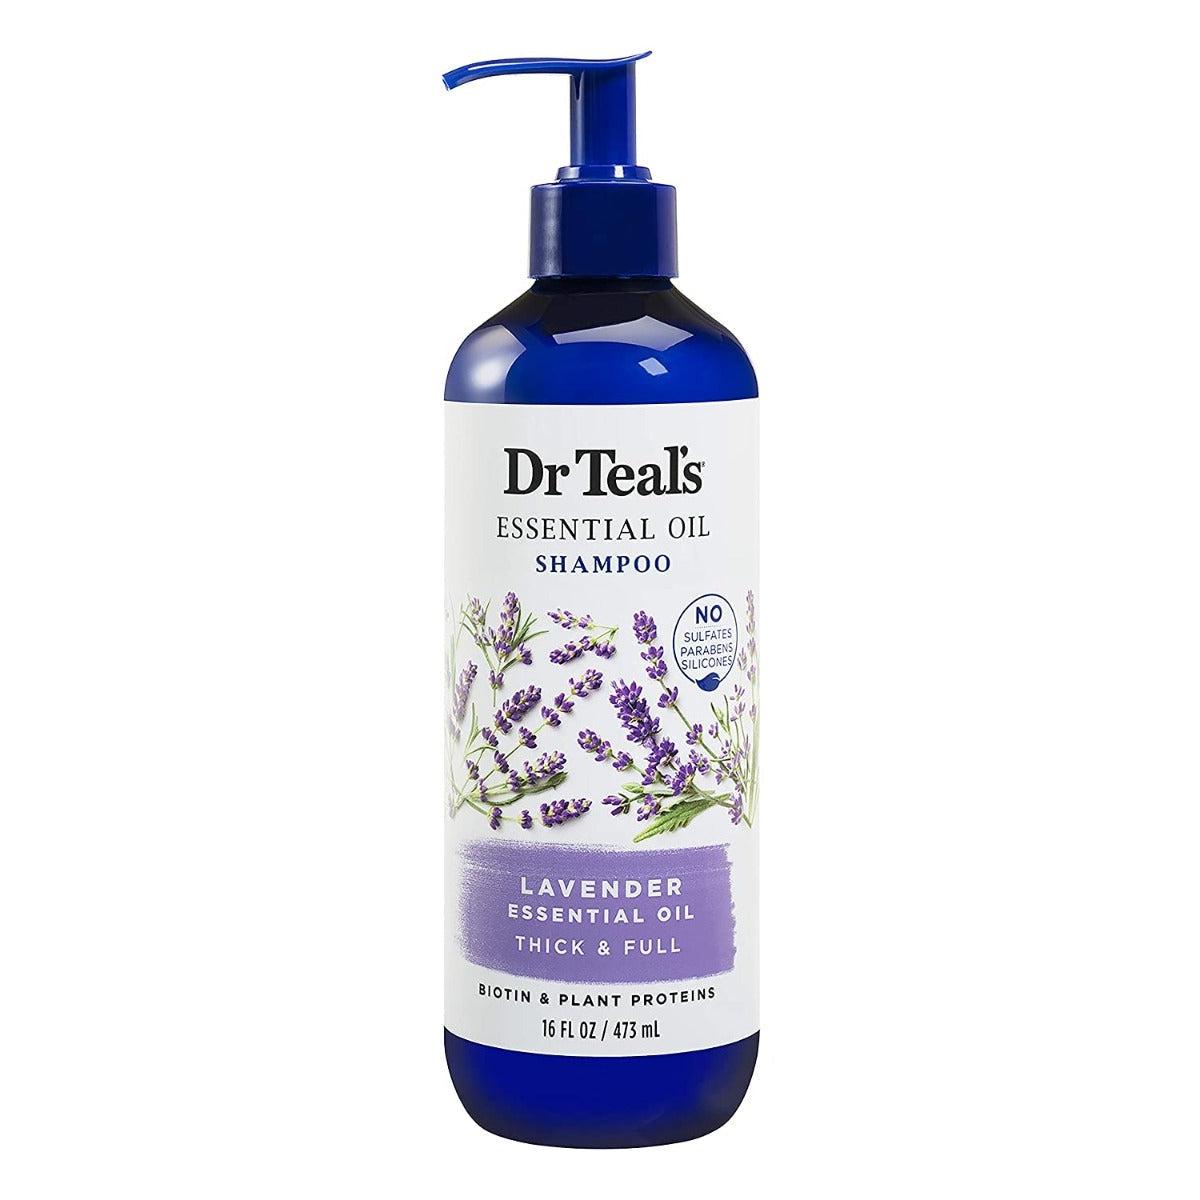 Dr. Teal's Shampoo Lavender Essential Oil Thick & Full No Sulfates No Parabens No Silicone 473ml